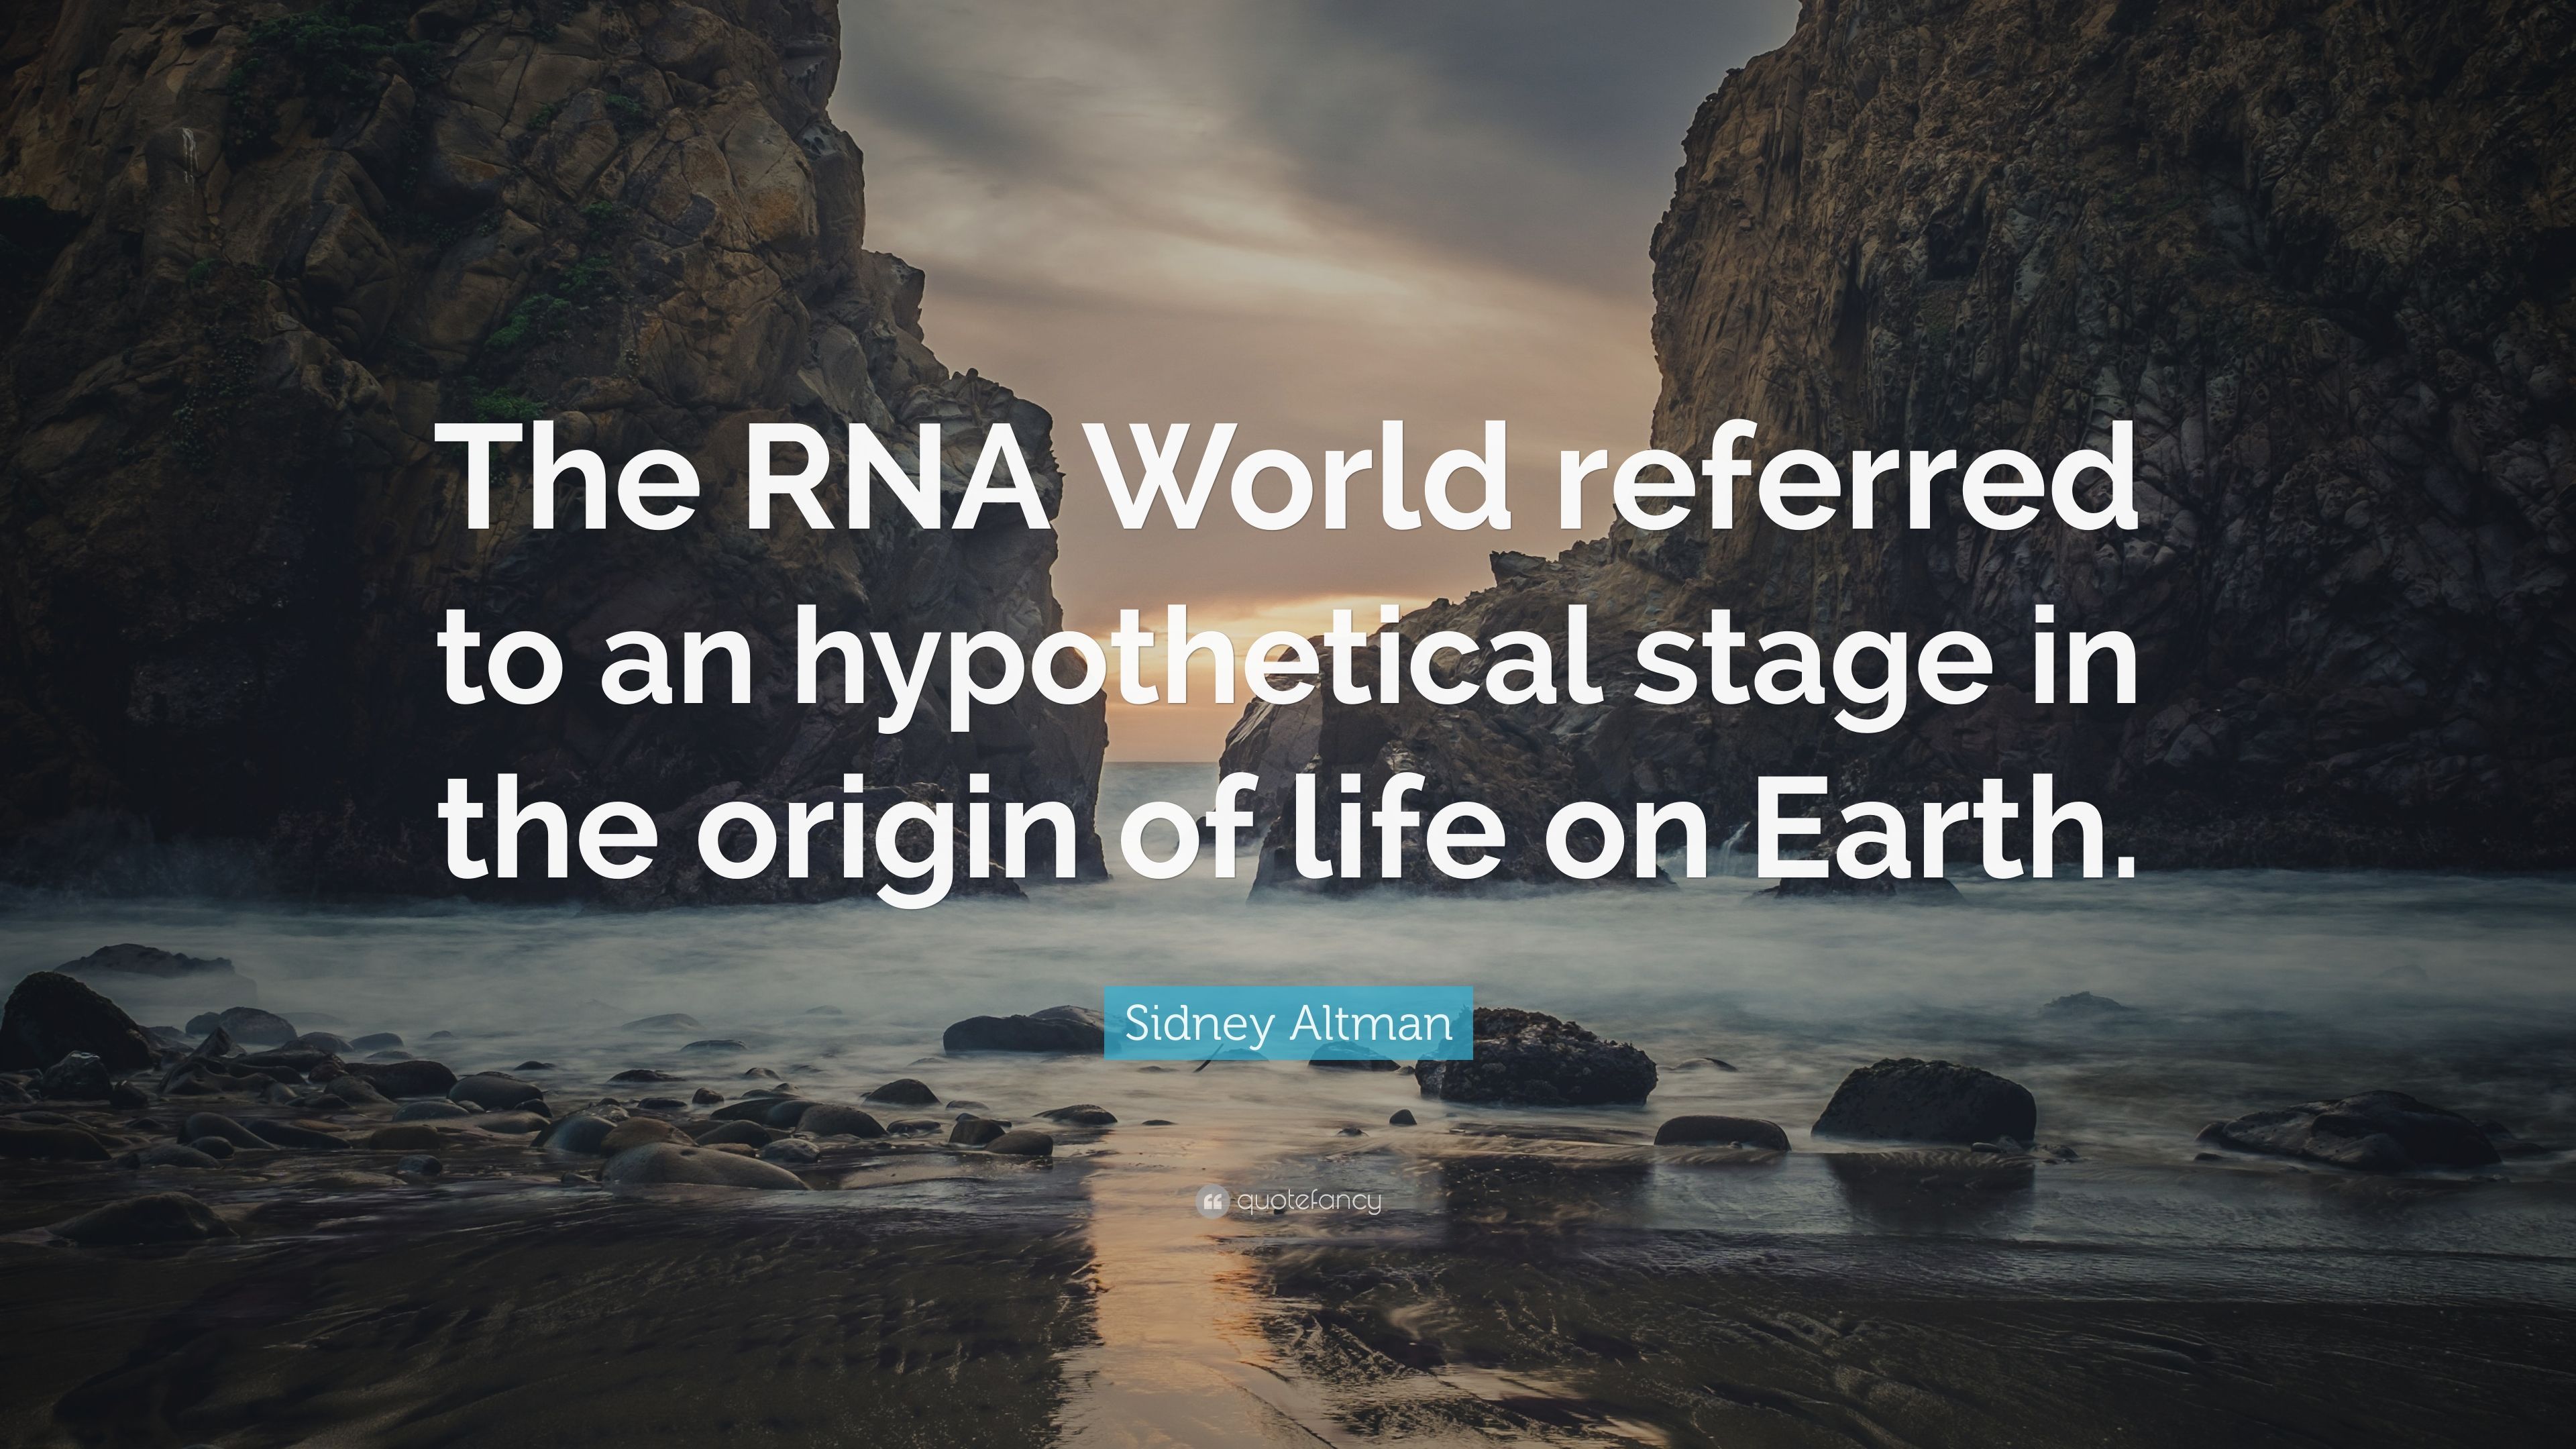 Sidney Altman Quote: “The RNA World referred to an hypothetical stage in the origin of life on Earth.” (7 wallpaper)